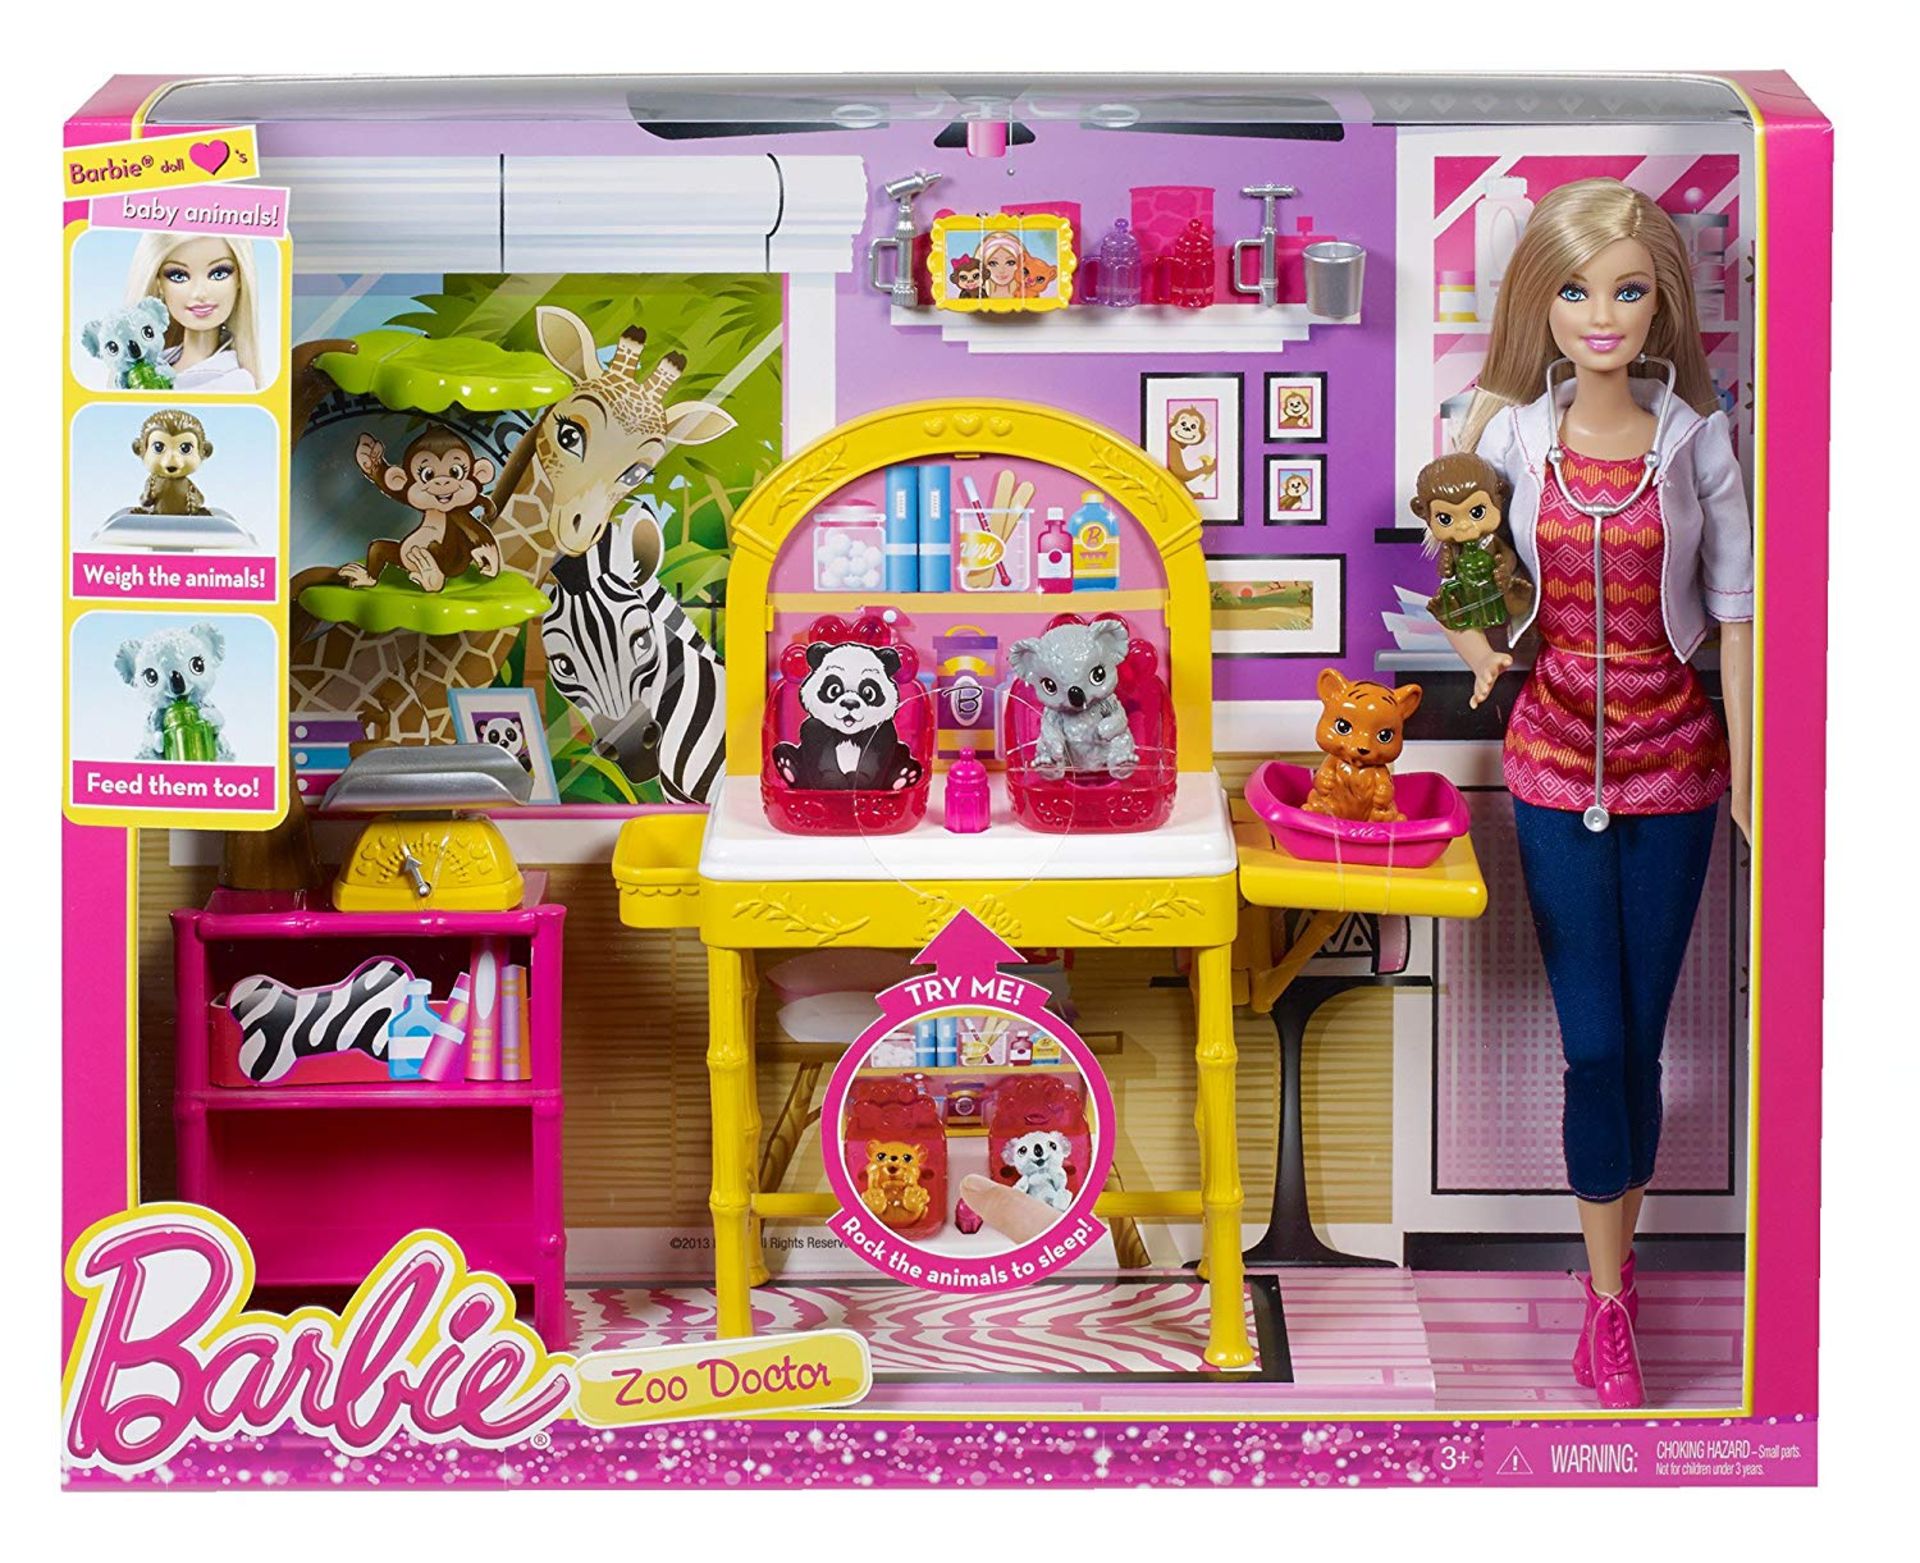 18 x Barbie Careers Zookeeper Doll and Playset | 887961009170 | RRP £539.82 - Image 2 of 2